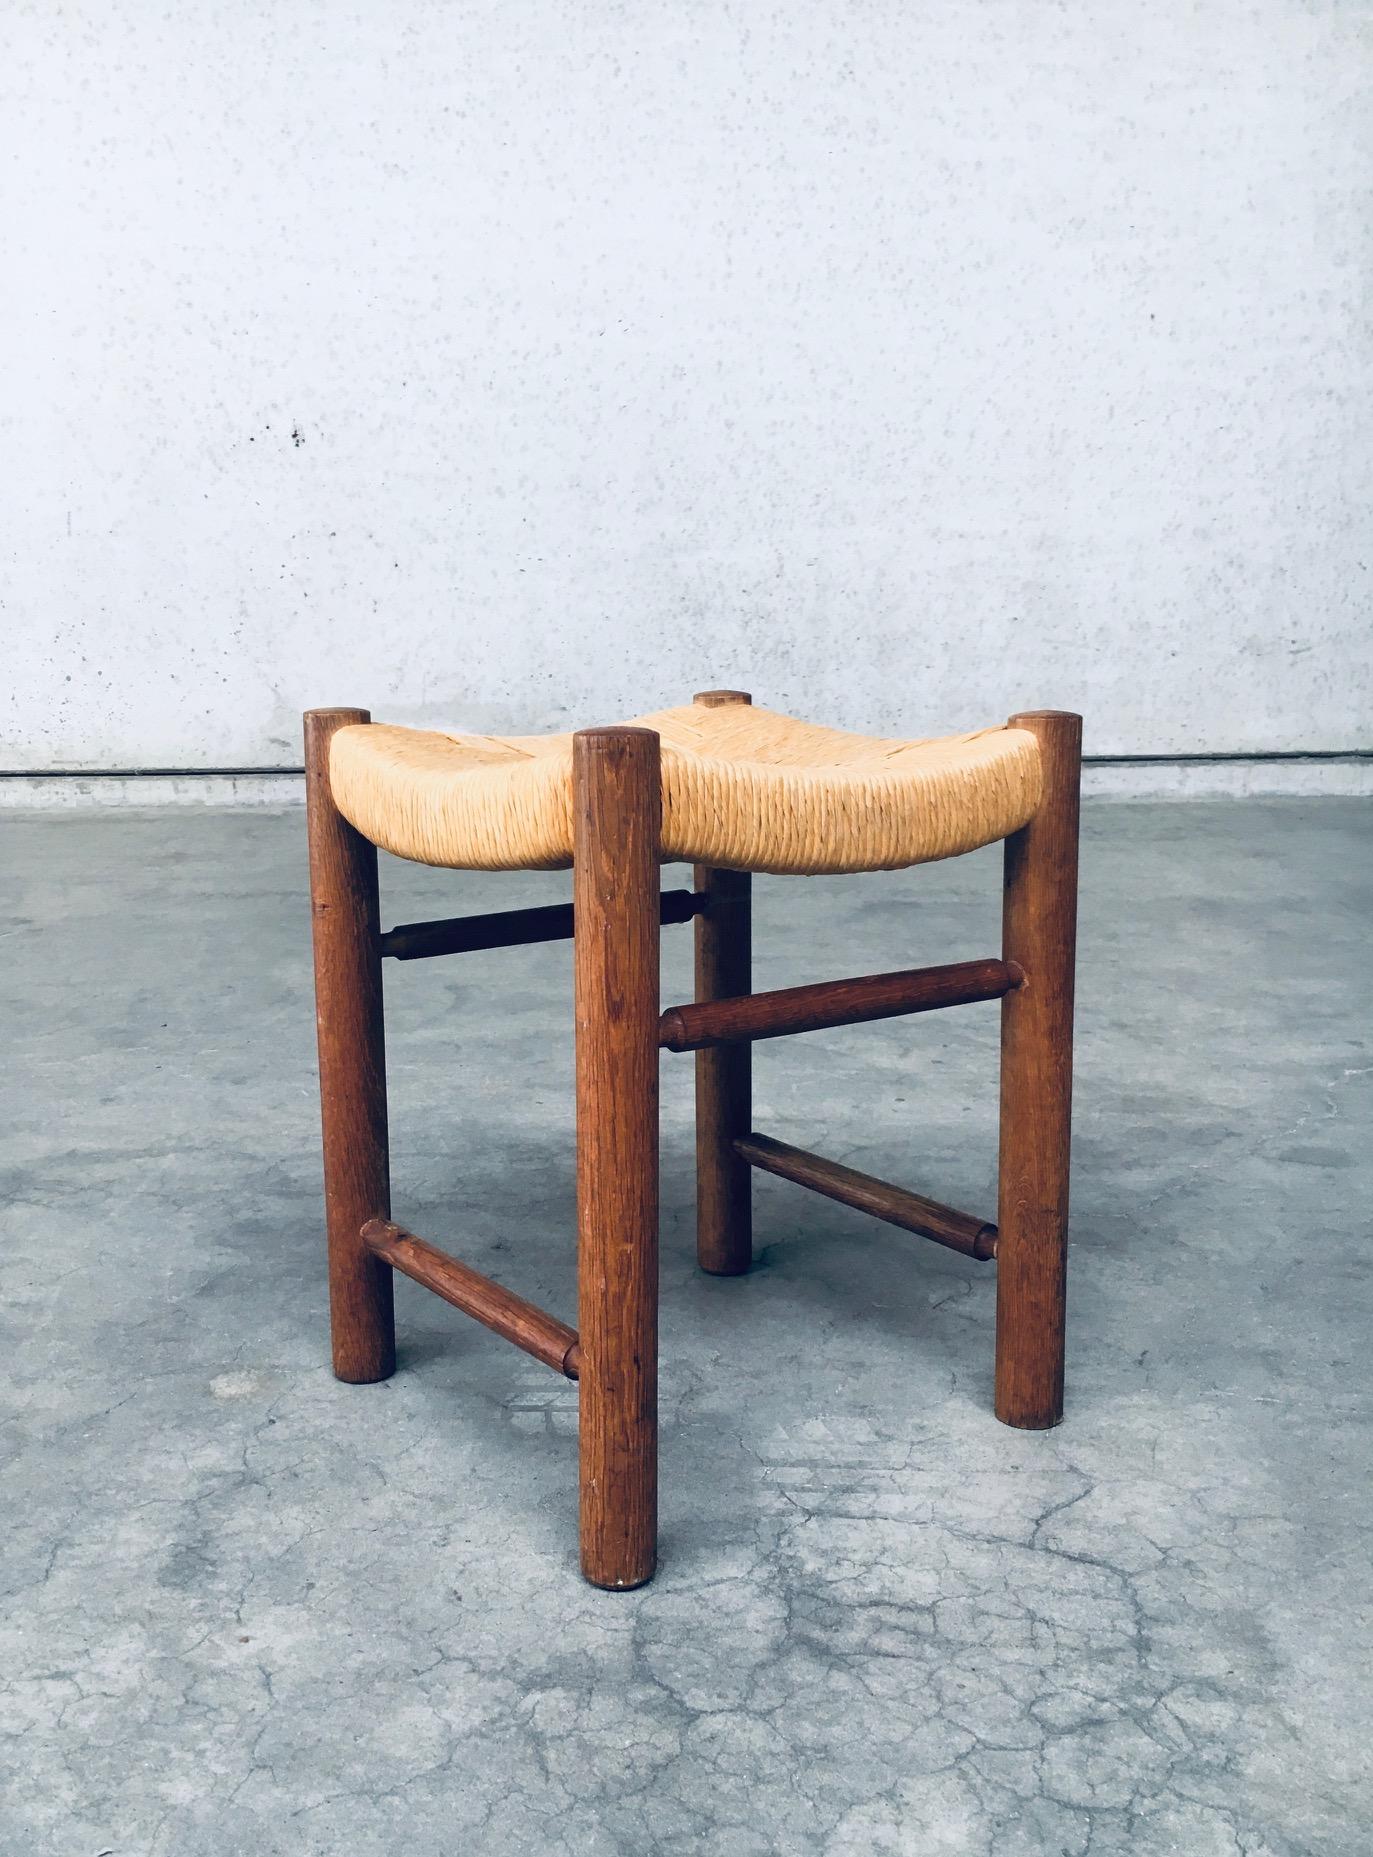 Vintage midcentury French Rustic Design Oak & Rush low stool. Made in France, 1950s / 60s period. Oak constructed stool with woven rush seat. This comes in very good, original condition. Measures 46cm x 38cm x 38cm.